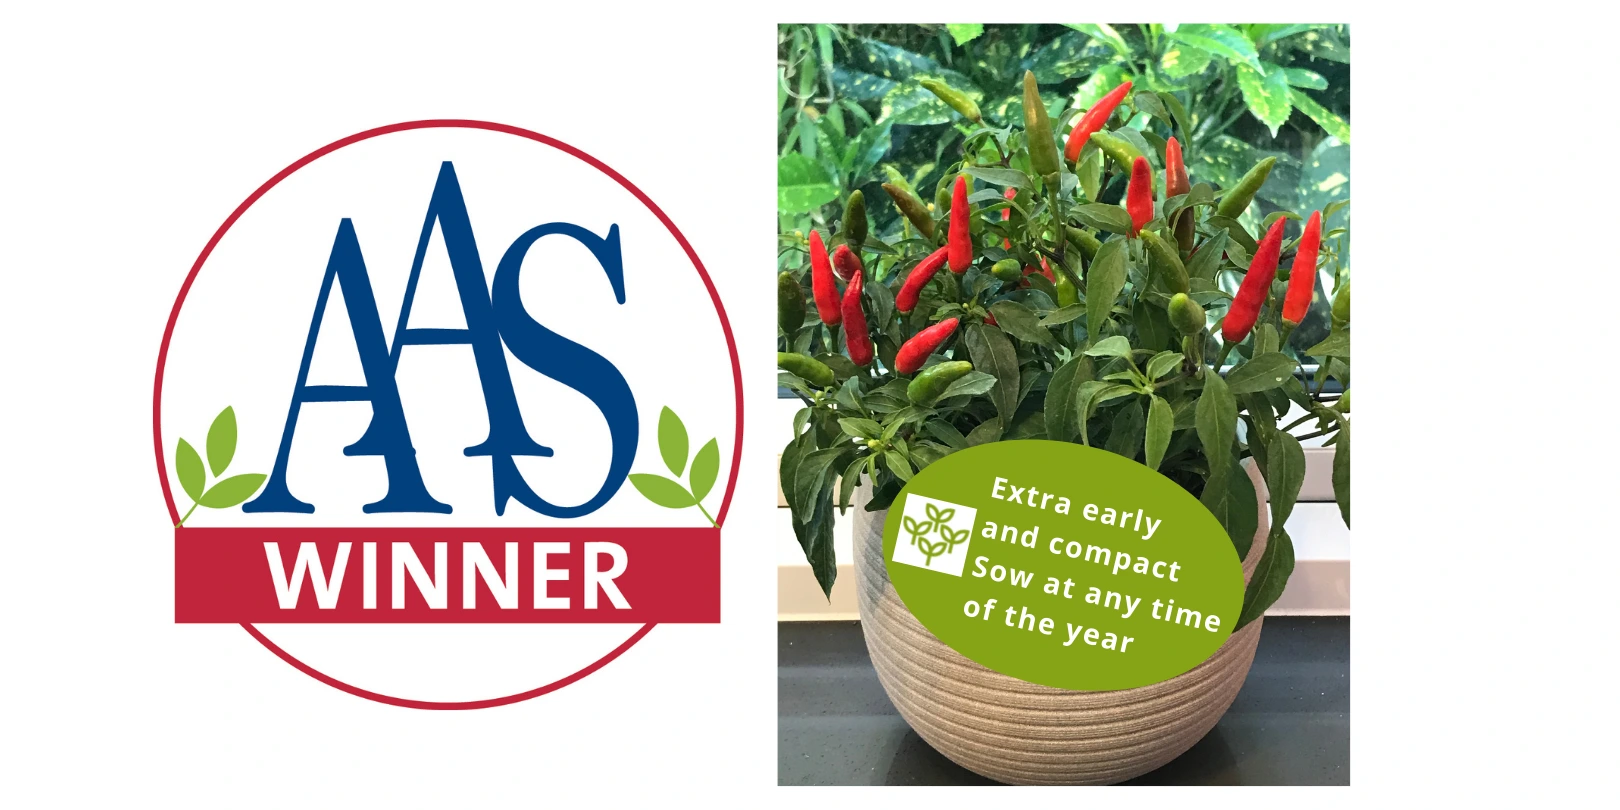 Ground breaking plant breeding produces Chilli Pepper Quickfire – AAS winner 2022